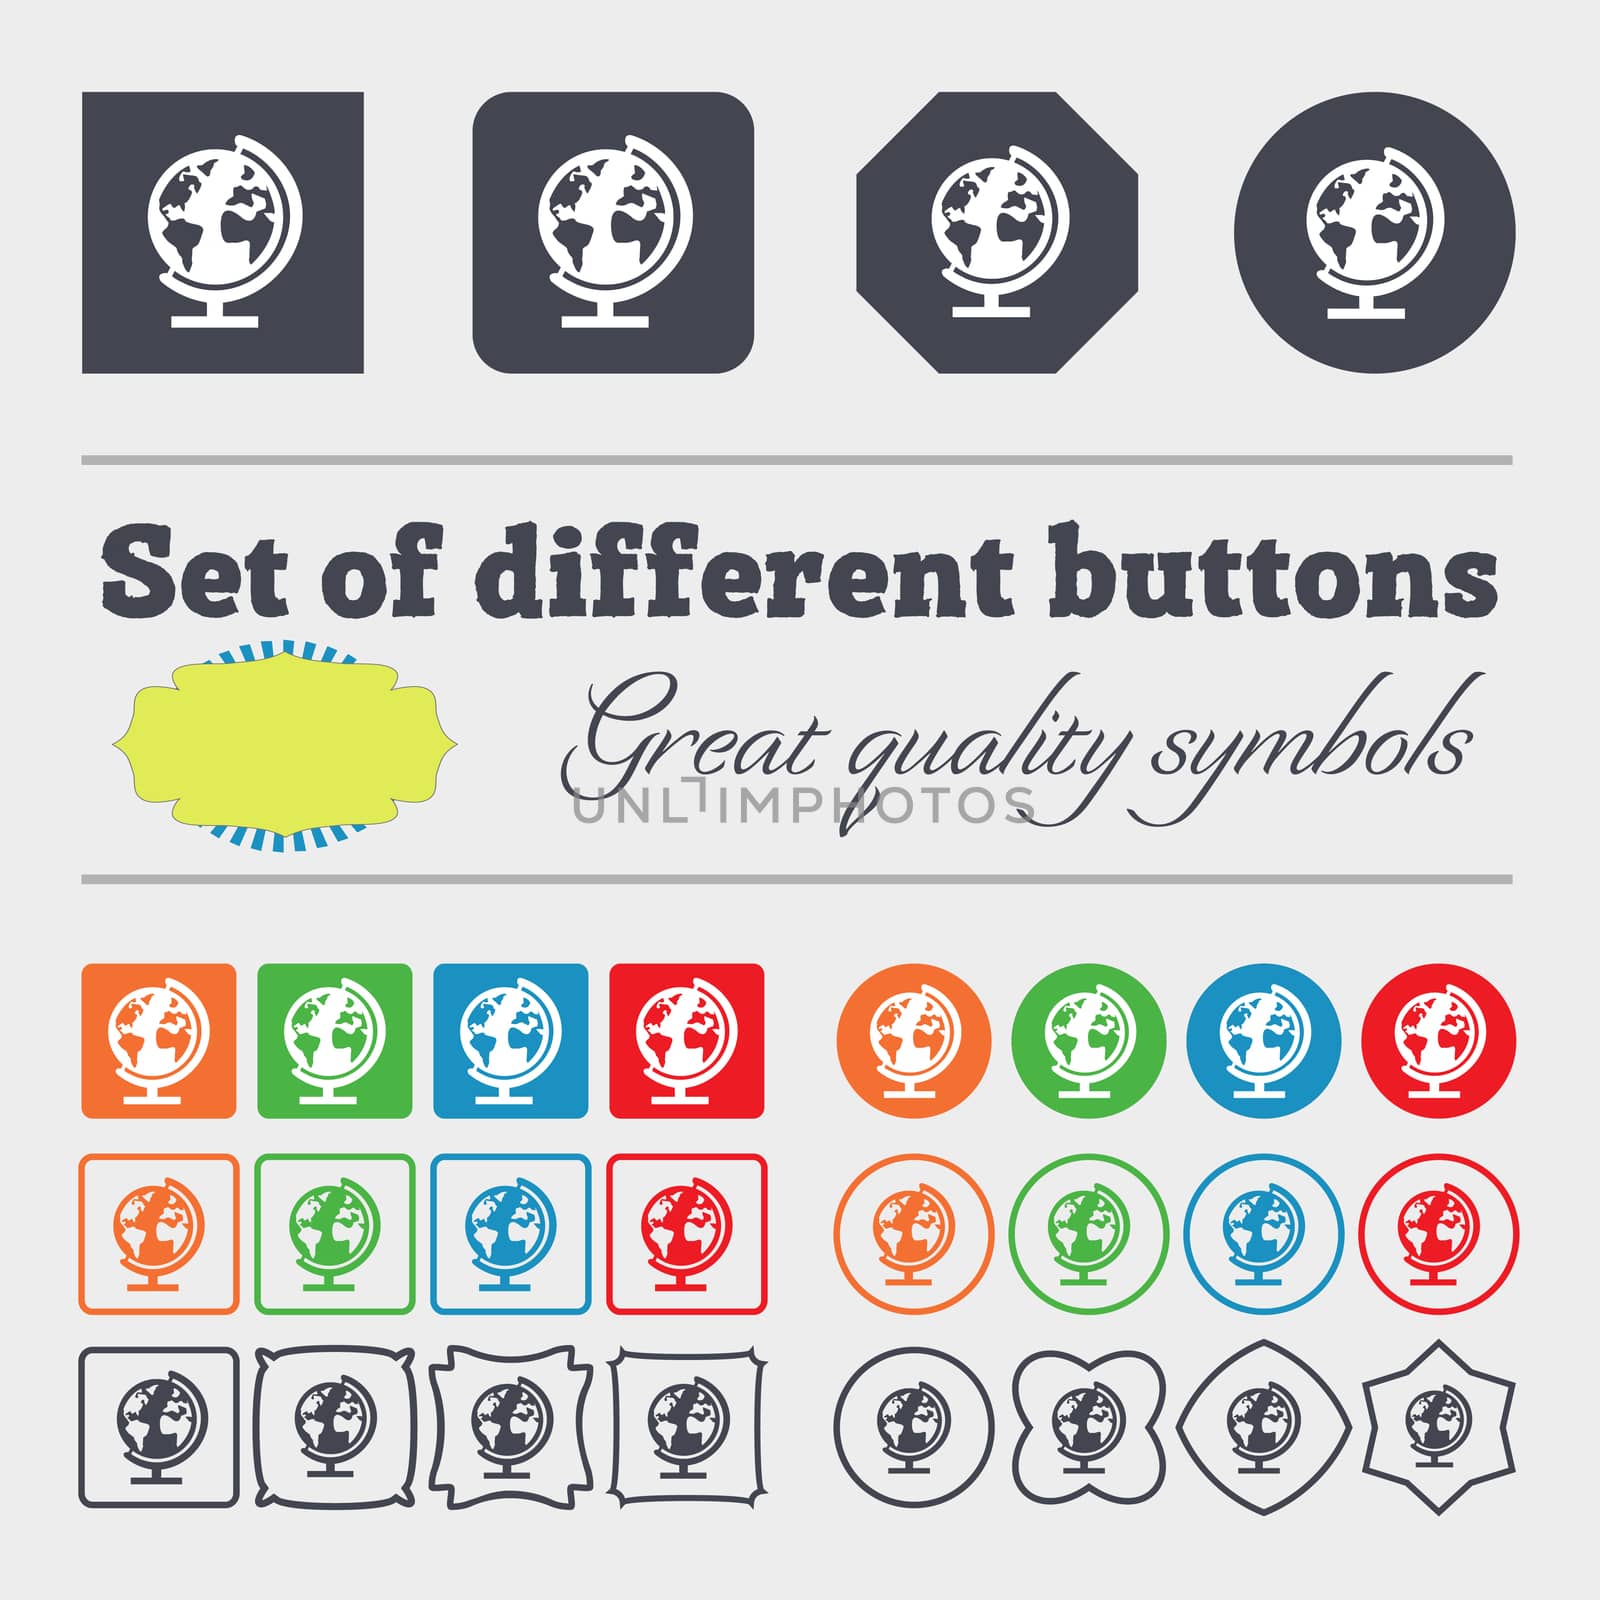 Globe sign icon. World map geography symbol. Globes on stand for studying. Big set of colorful, diverse, high-quality buttons. illustration